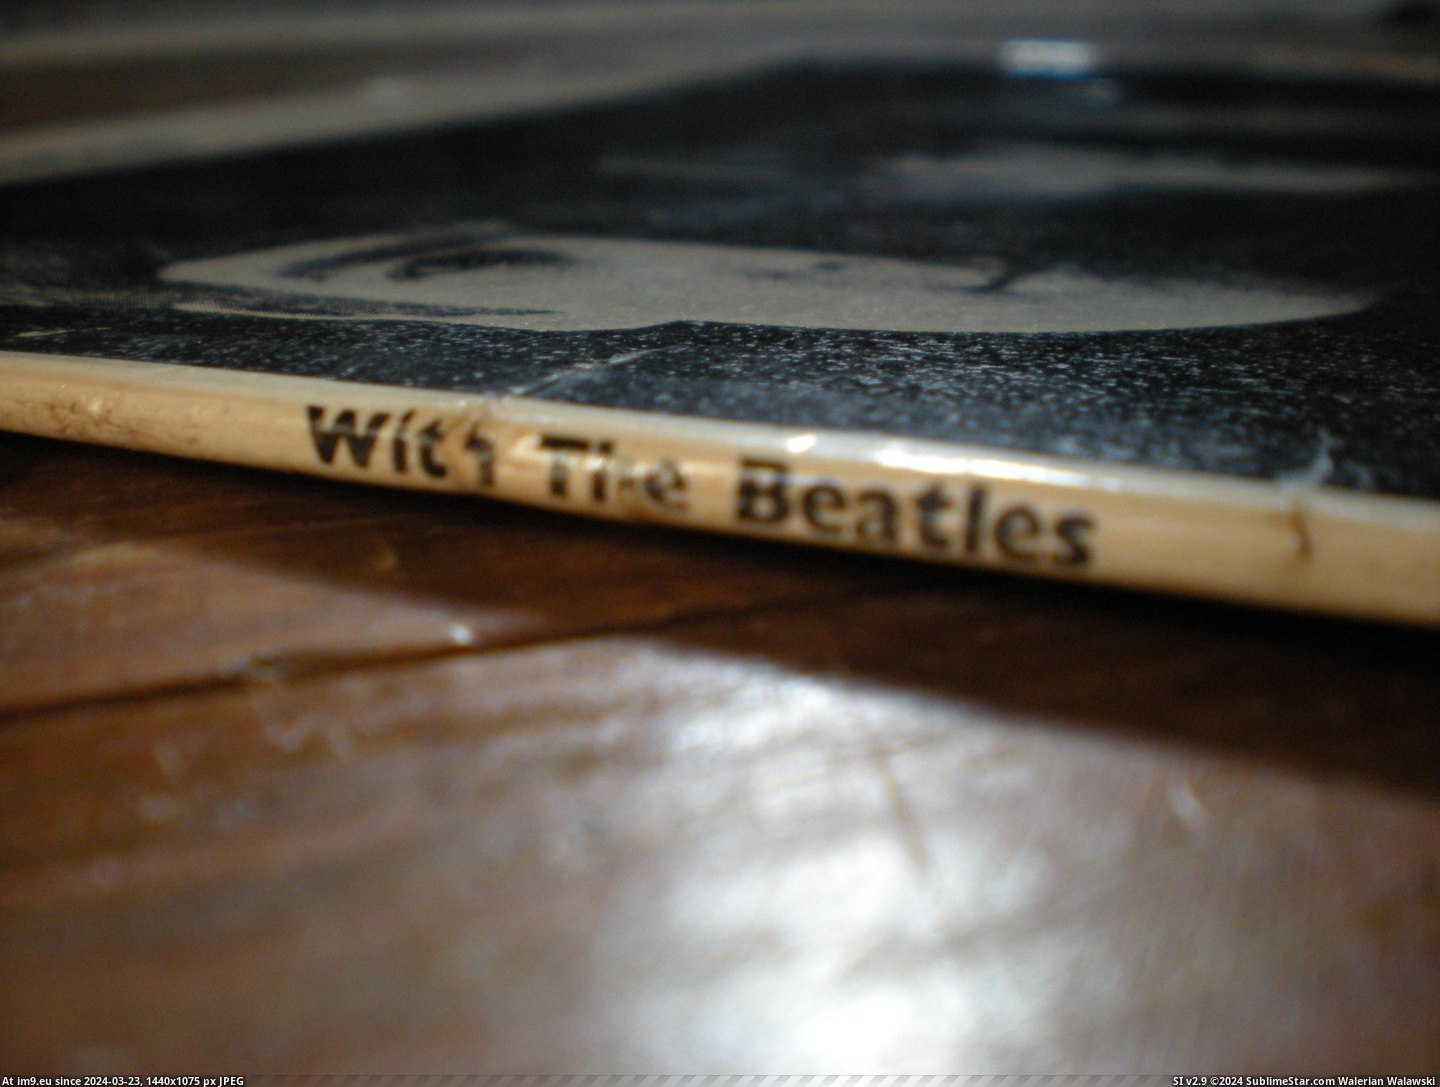  #Beatles  With The Beatles 7N 7 Pic. (Obraz z album new 1))